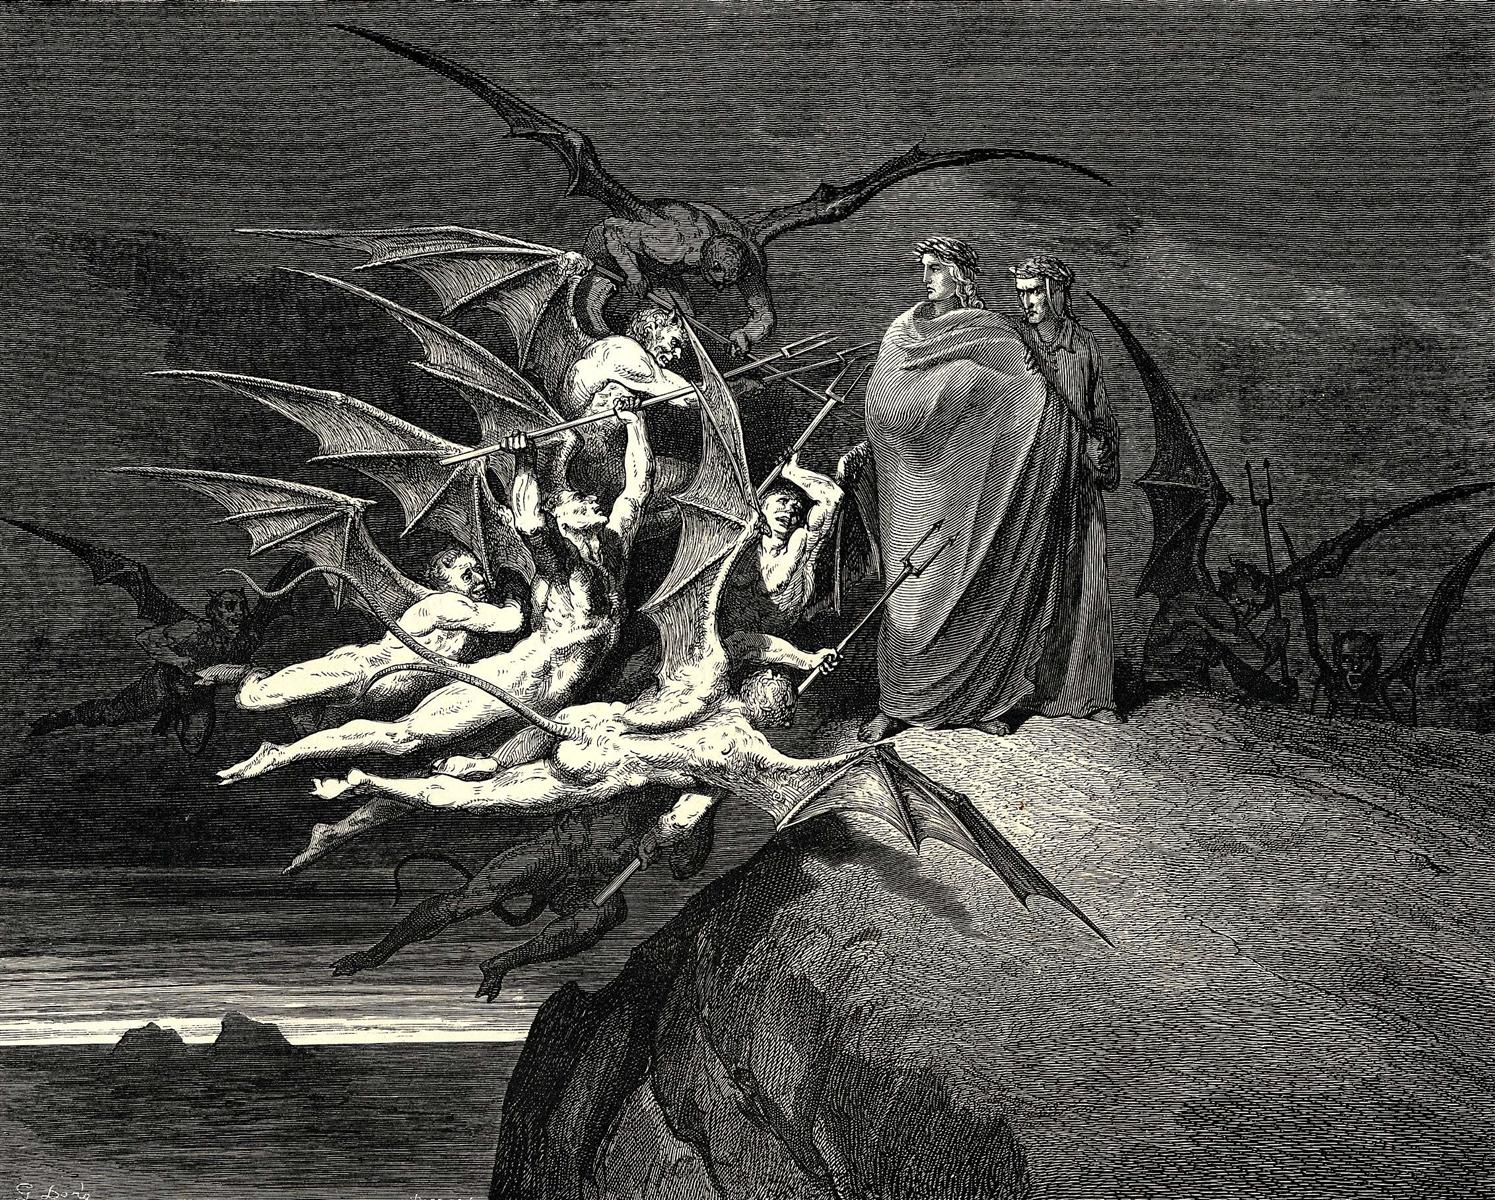 images/gustave-dore/the-inferno-canto-21-1.jpg!HD.jpg